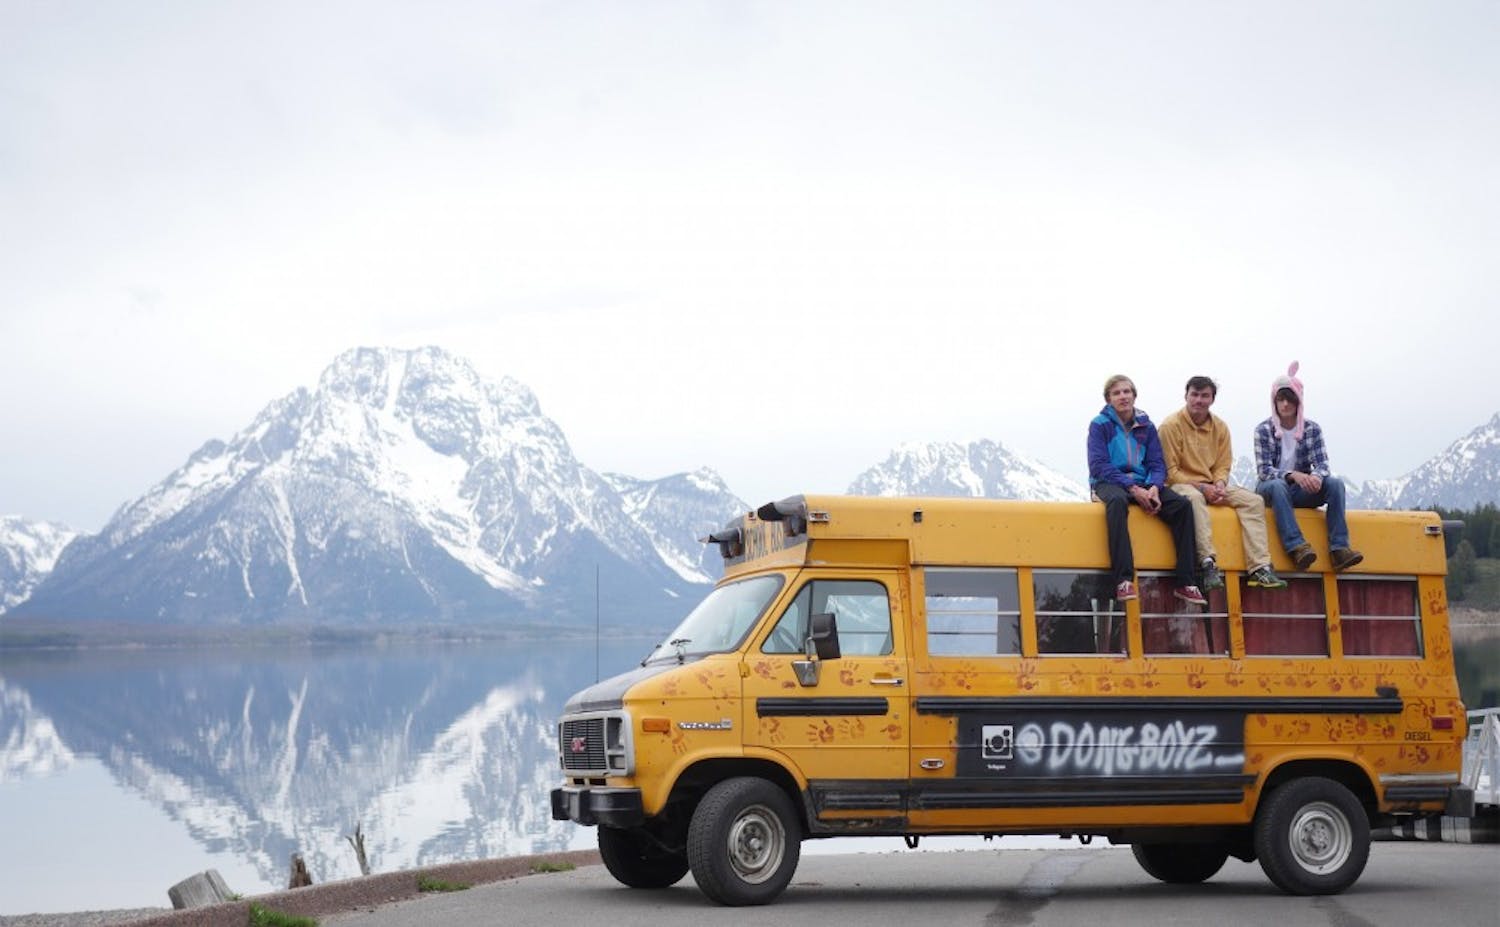 Three Duke students traveled across the U.S. last May as part of a journey to Sasquatch Music Festival in Washington.